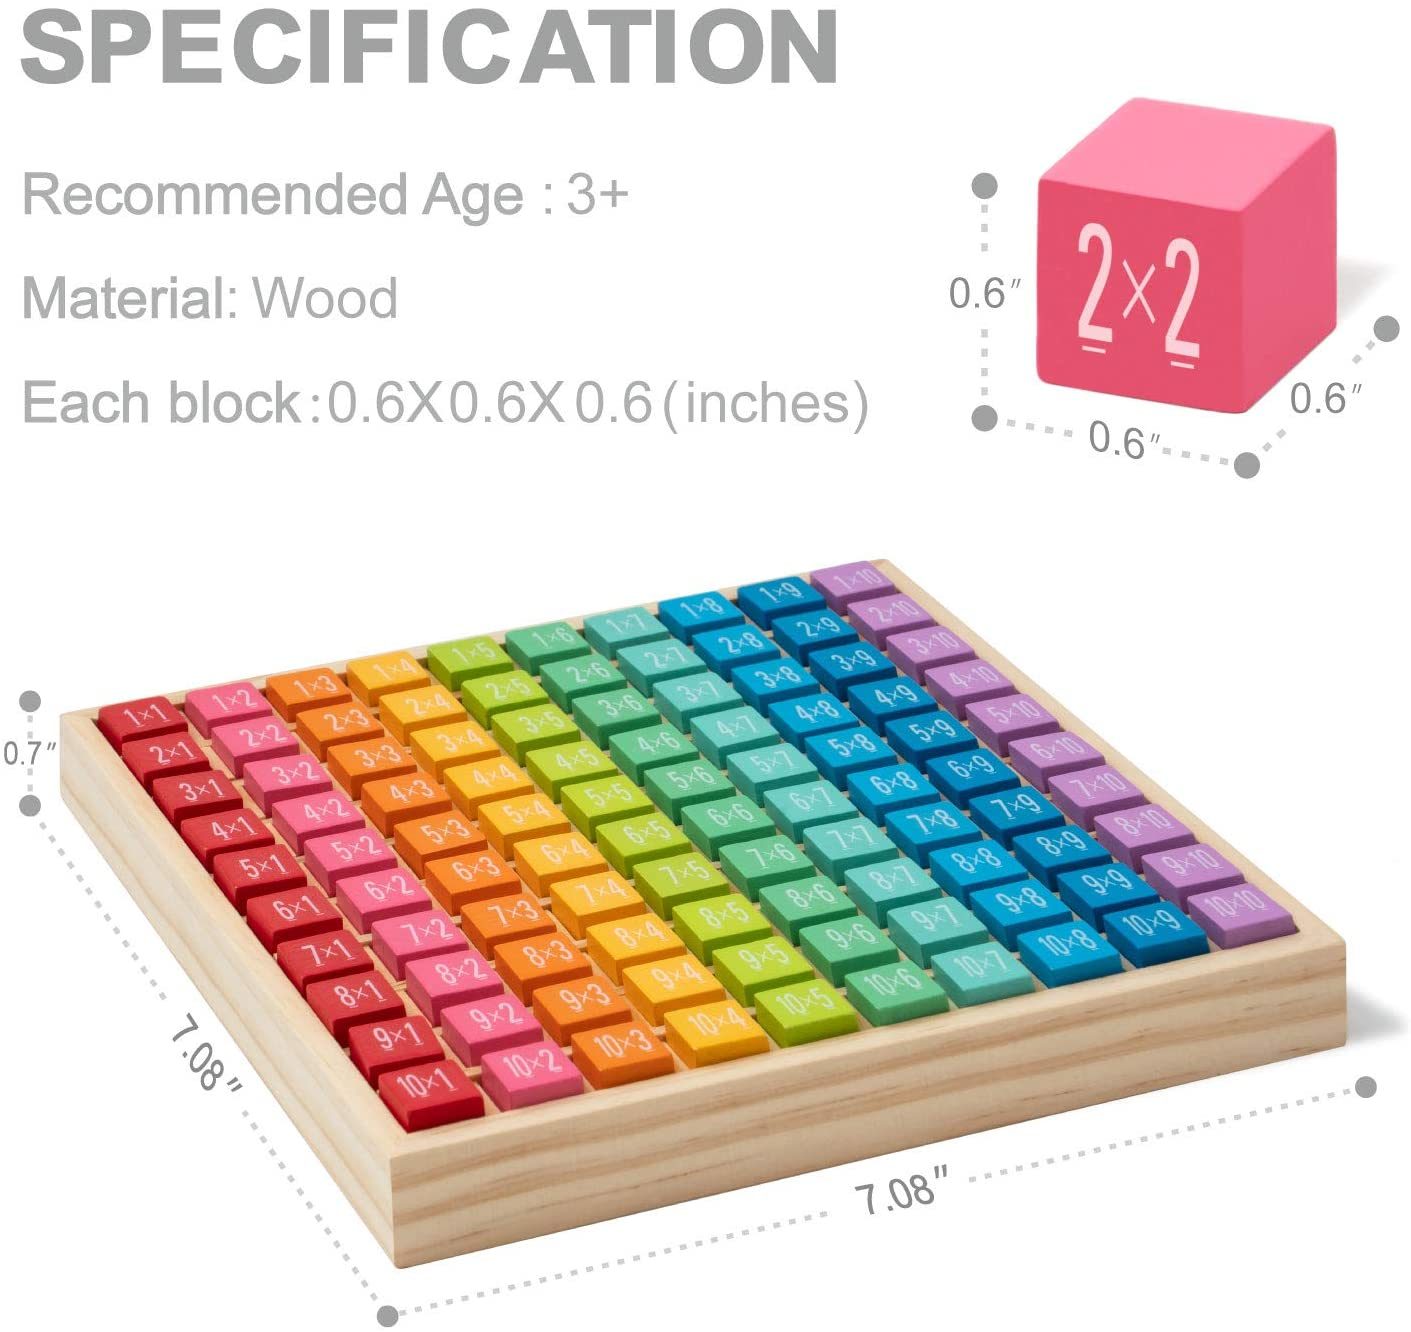 Wooden Multiplication & Math Table Board Game, Kids Montessori Math Manipulatives Learning Toys Gift, Aged 3 Years Old and Up - 100 Wooden Counting Blocks